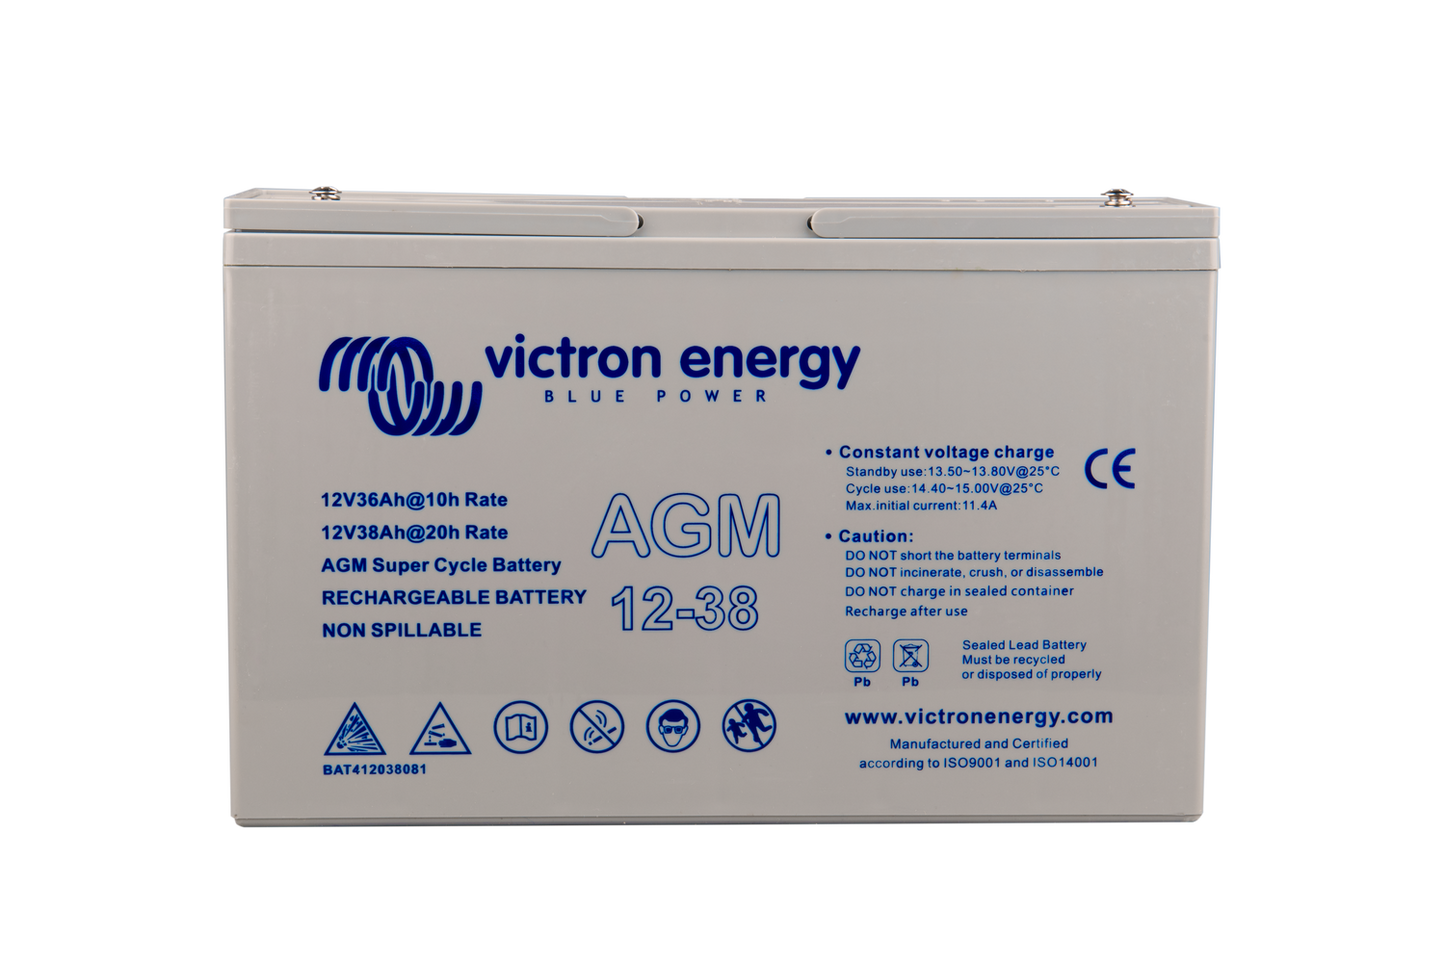 AGM Super Cycle battery